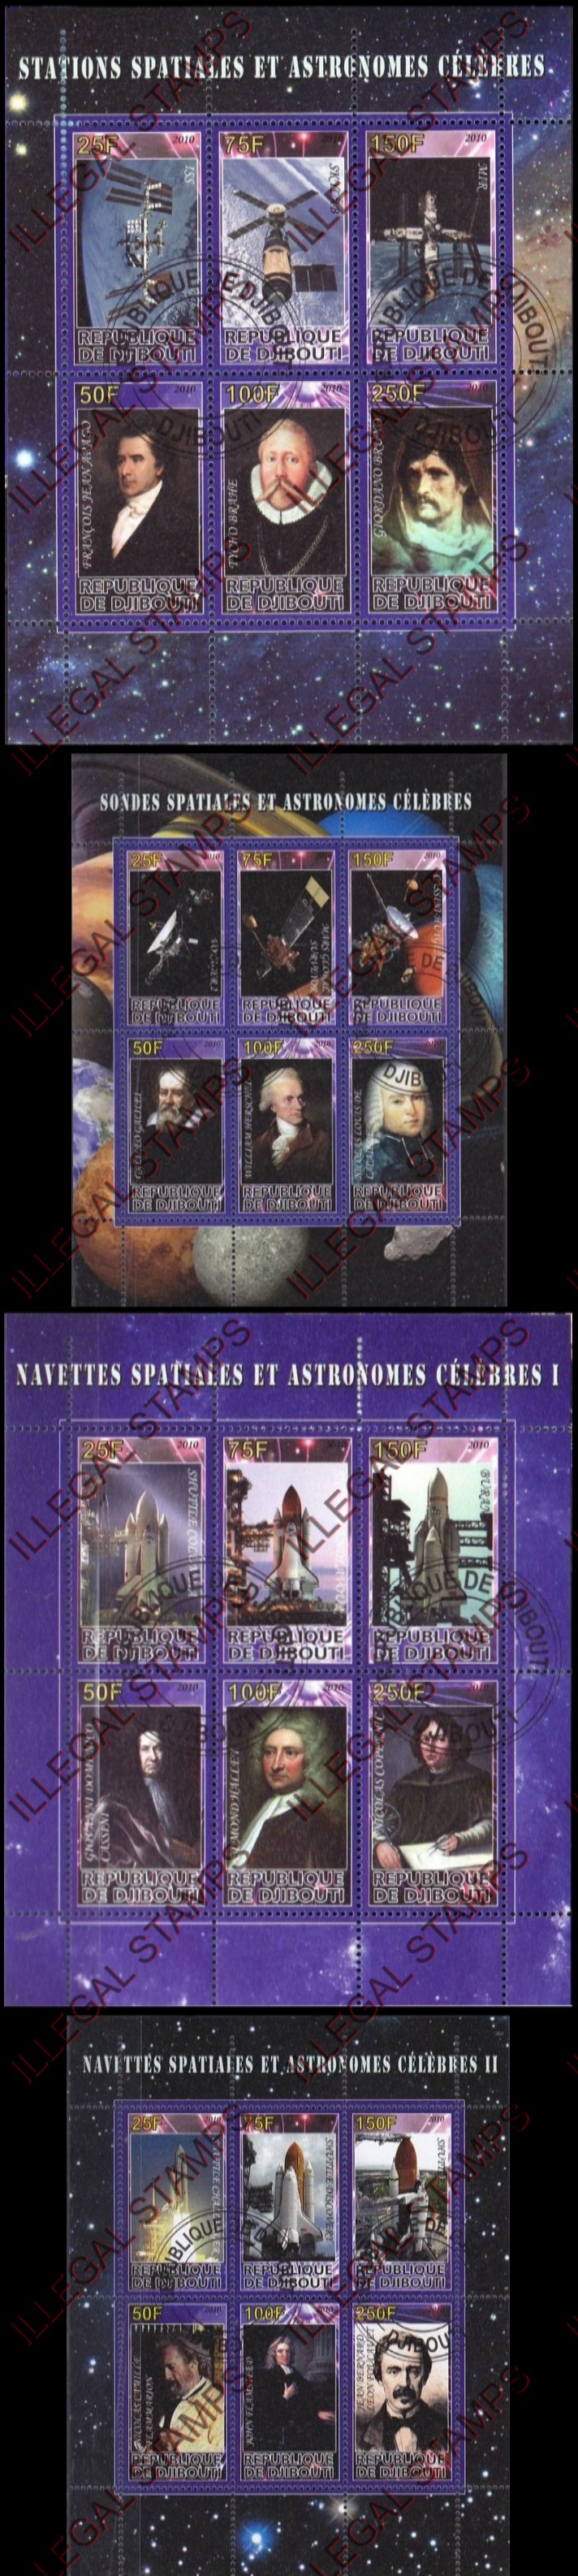 Djibouti 2010 Spacecraft and Astronomers Illegal Stamp Sheetlets of 6